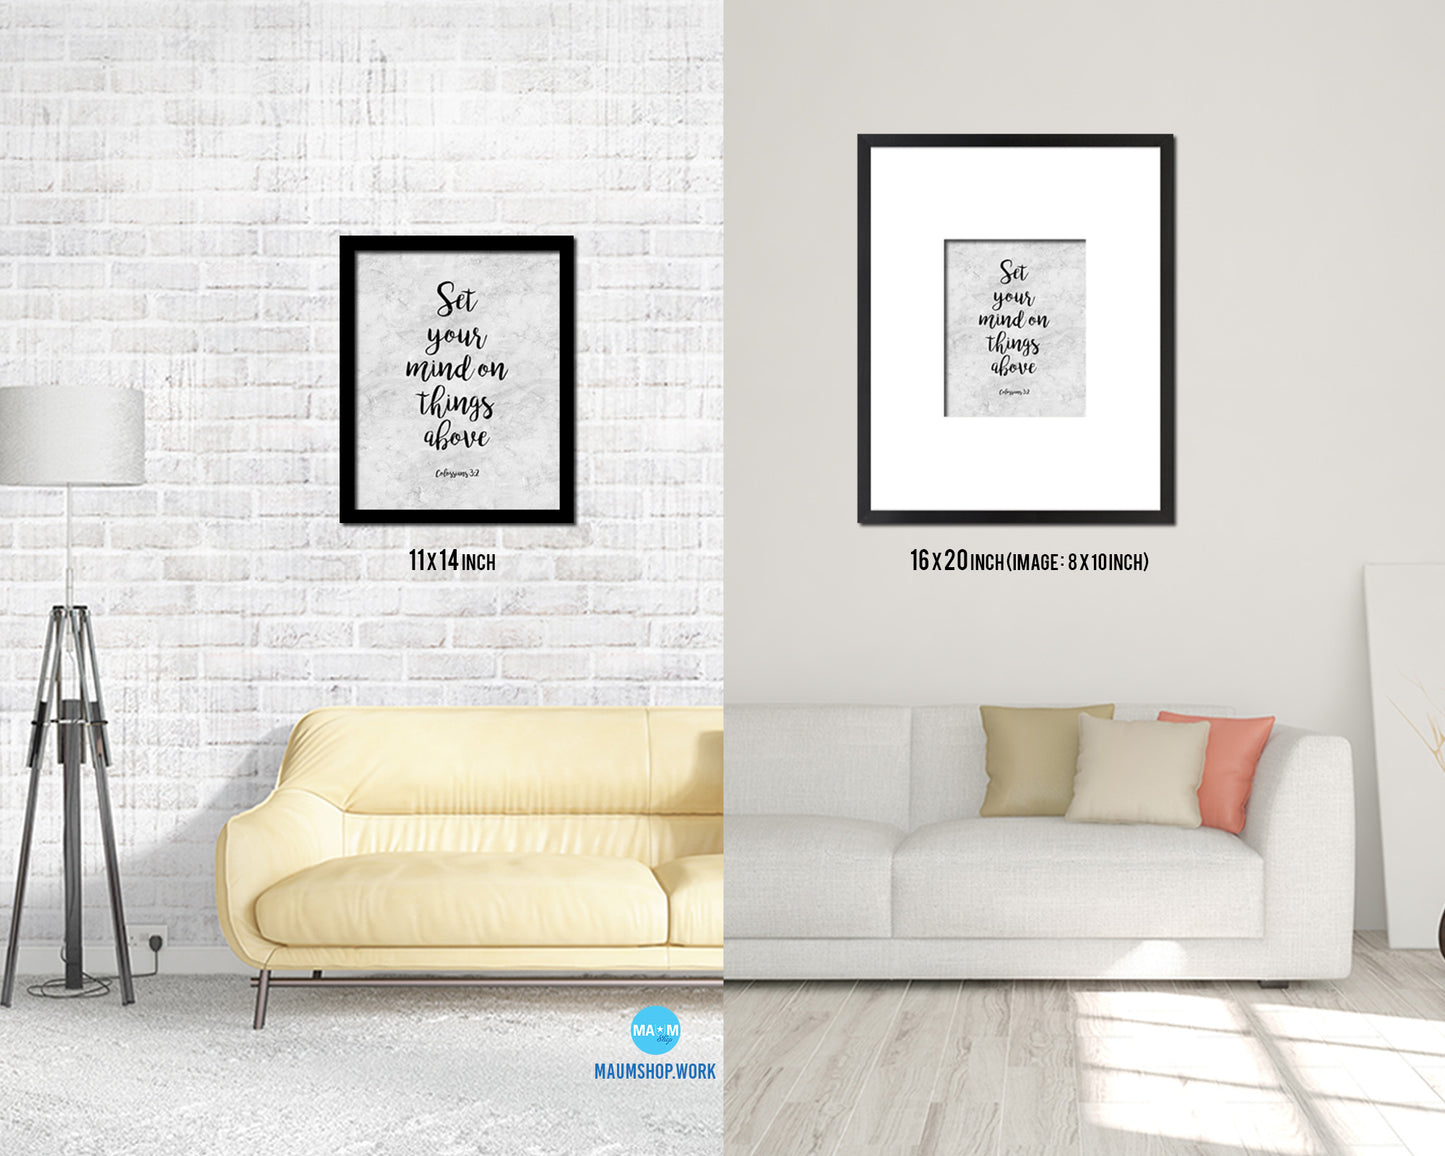 Set your mind on things above, Colossians 3:2 Bible Scripture Verse Framed Print Wall Art Decor Gifts